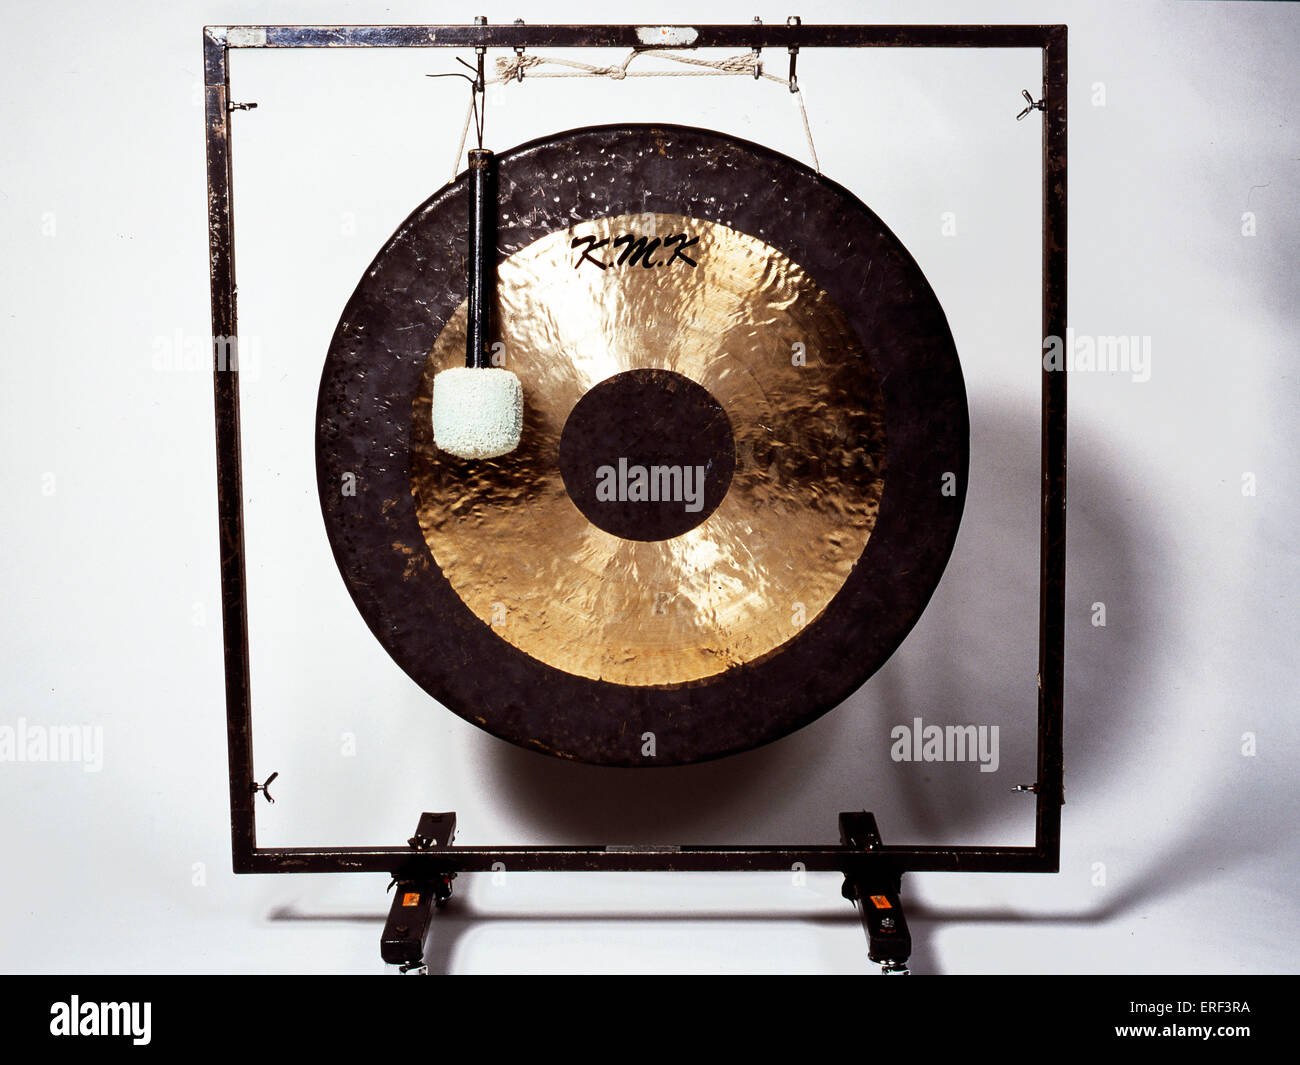 Tam-tam (or tamtam) - percussion instrument, similar to gong. Stock Photo